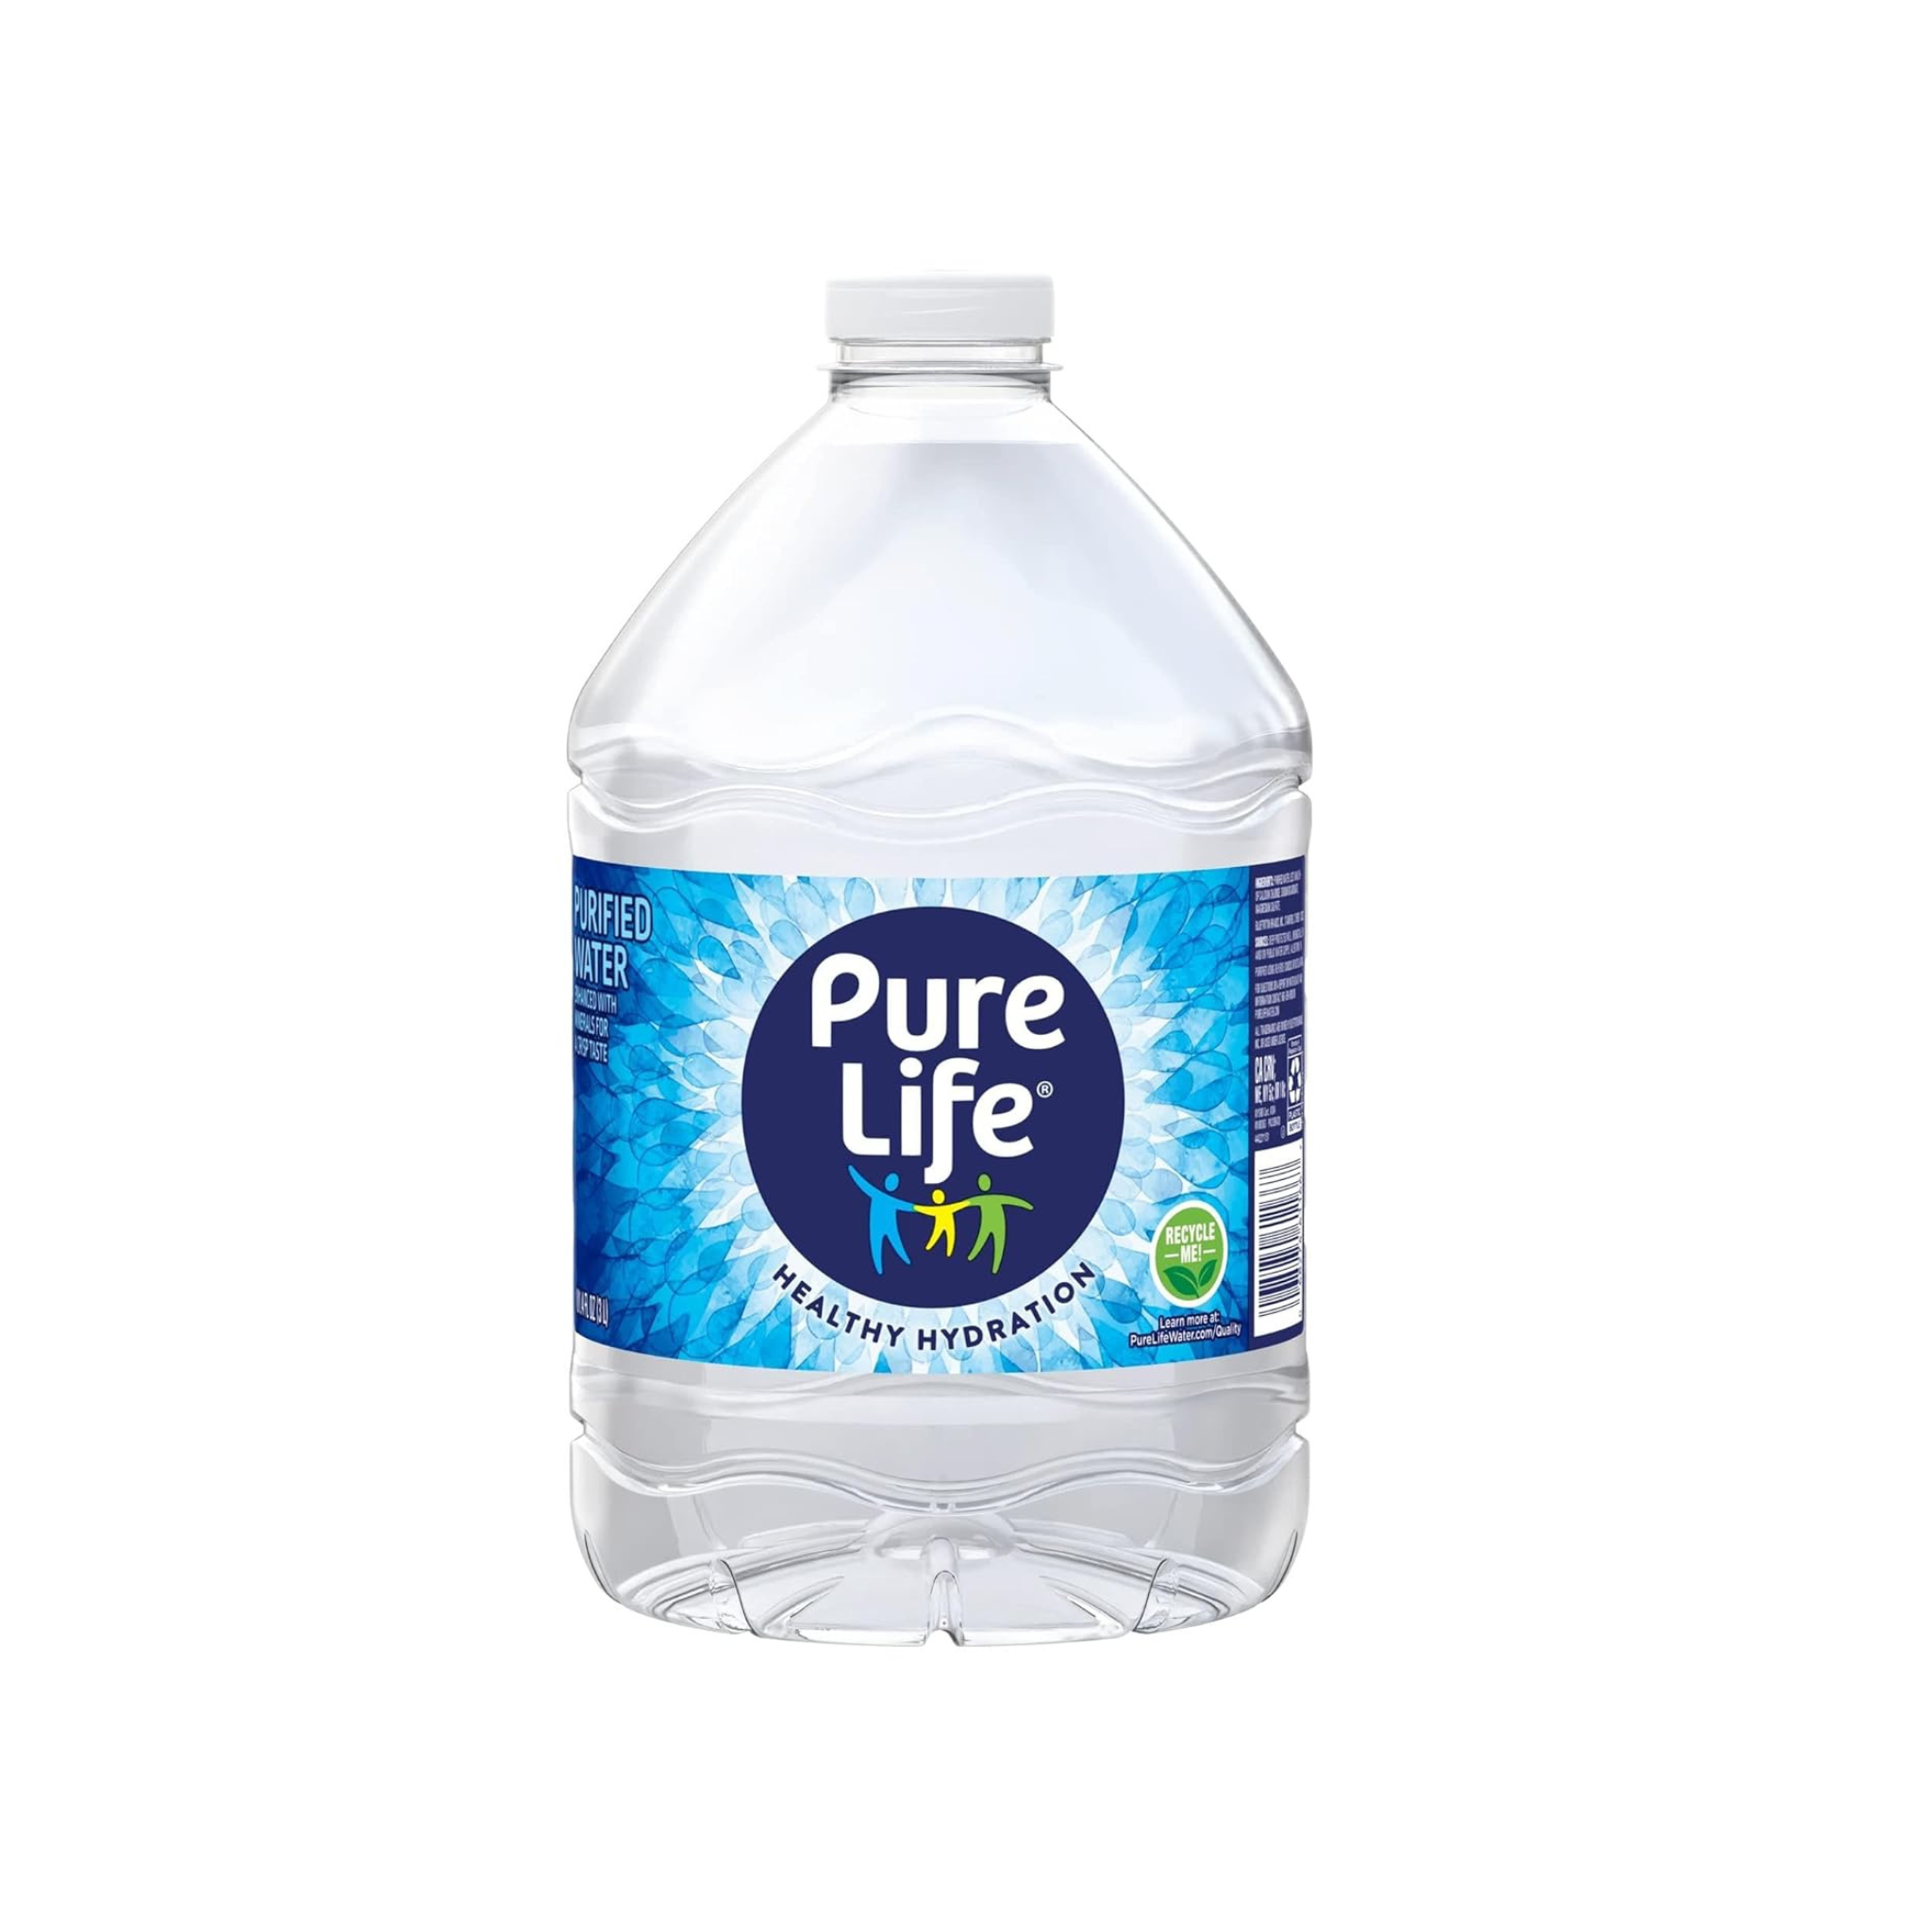 Pure Life Purified Water, 101.4 Fl Oz Bottle